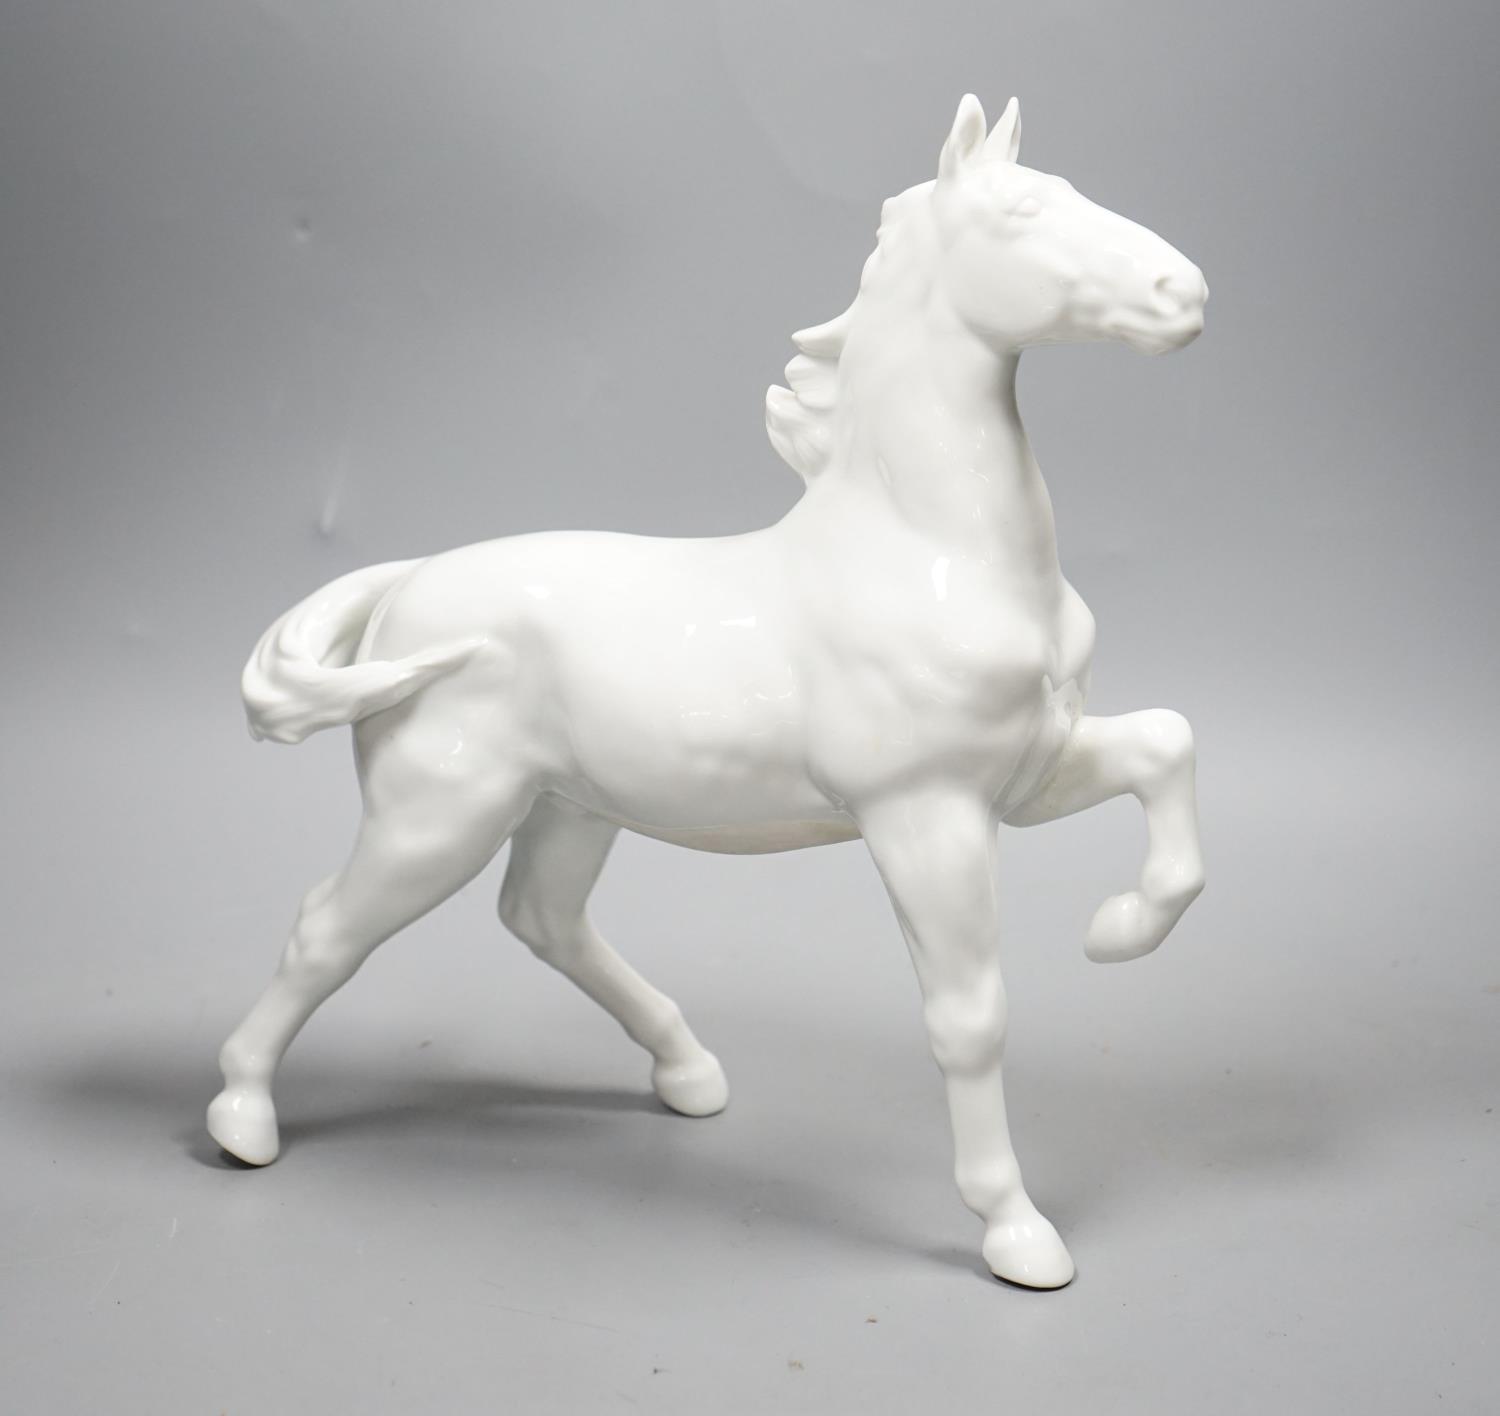 A Japanese porcelain figure of a horse, a Chinese blue and white dish, a Southeast Asian metal